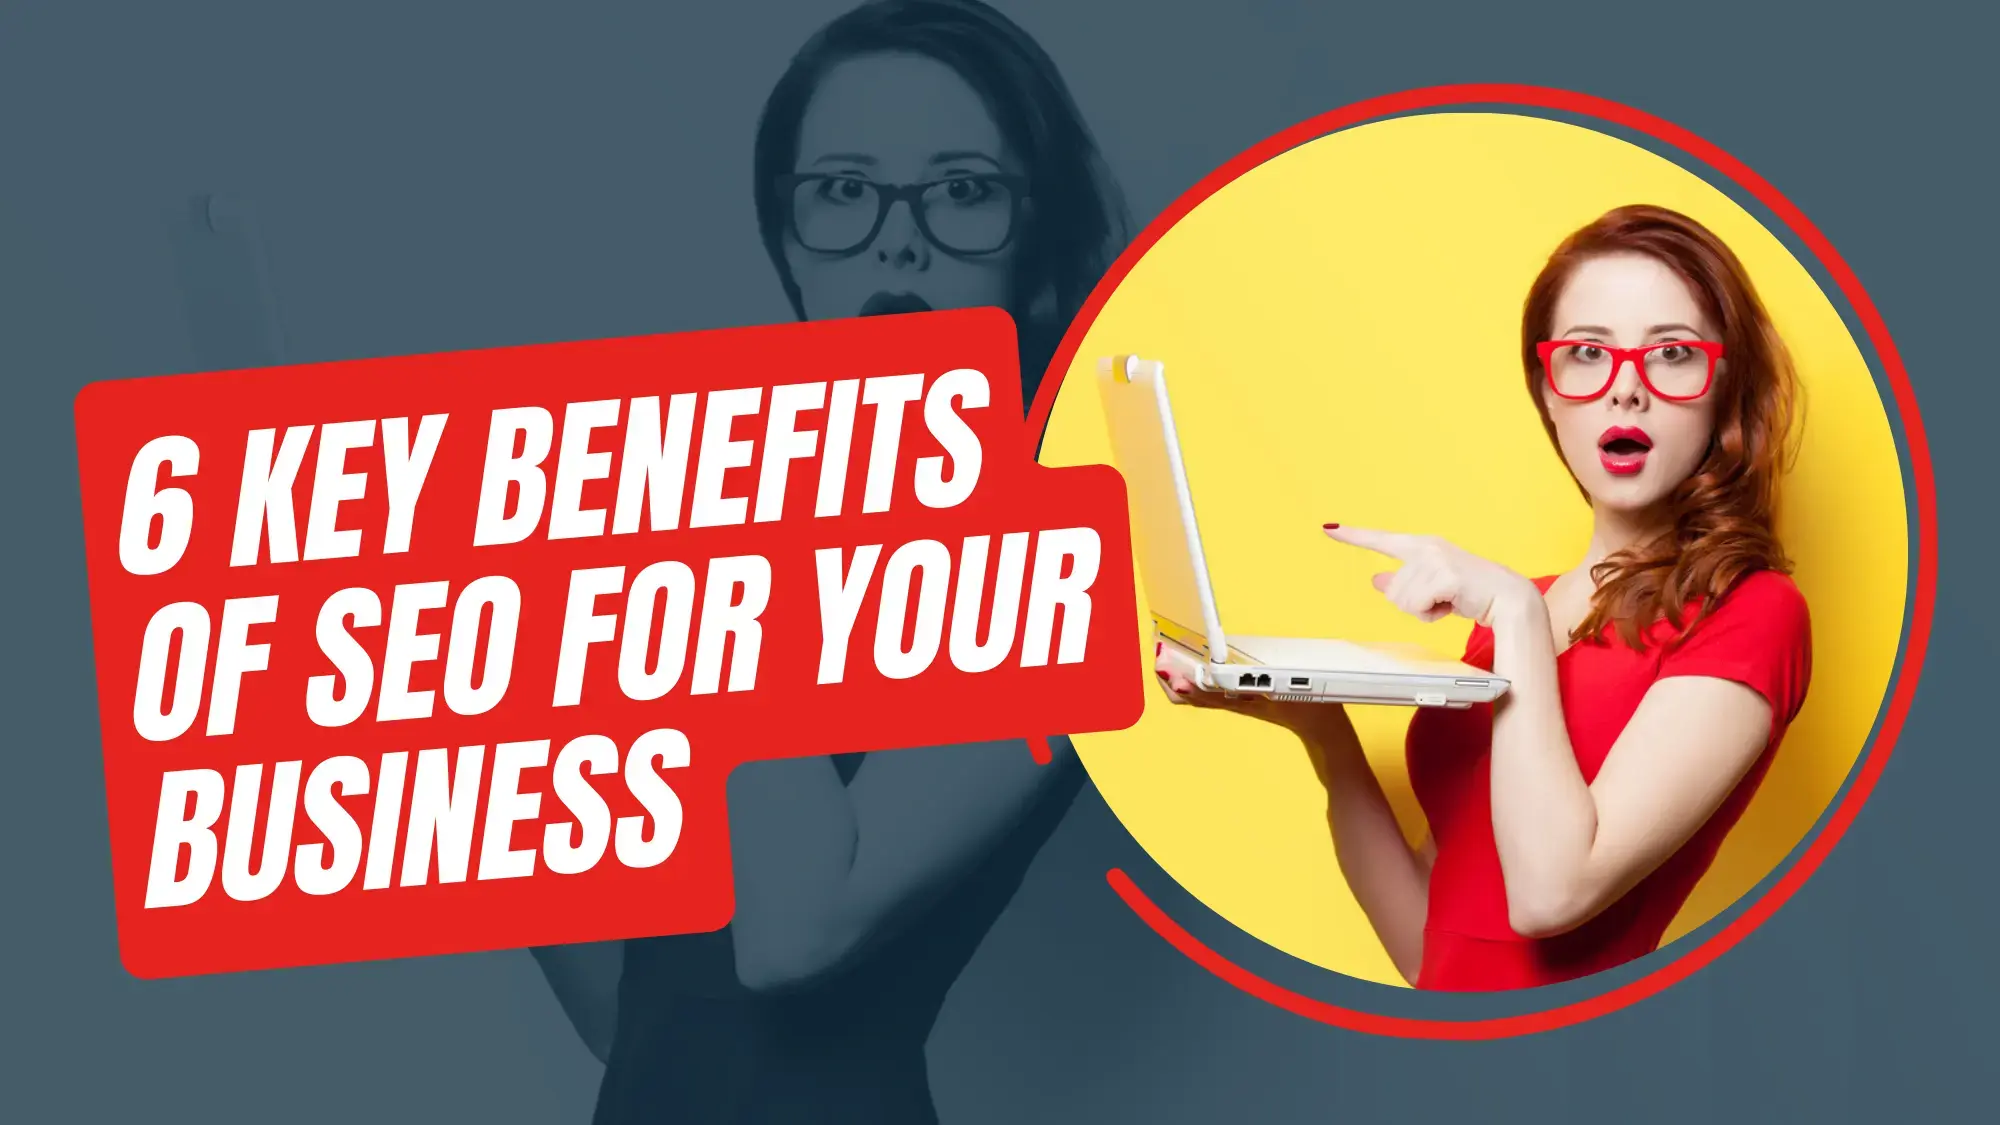 6 Key Benefits Of SEO For Your Business